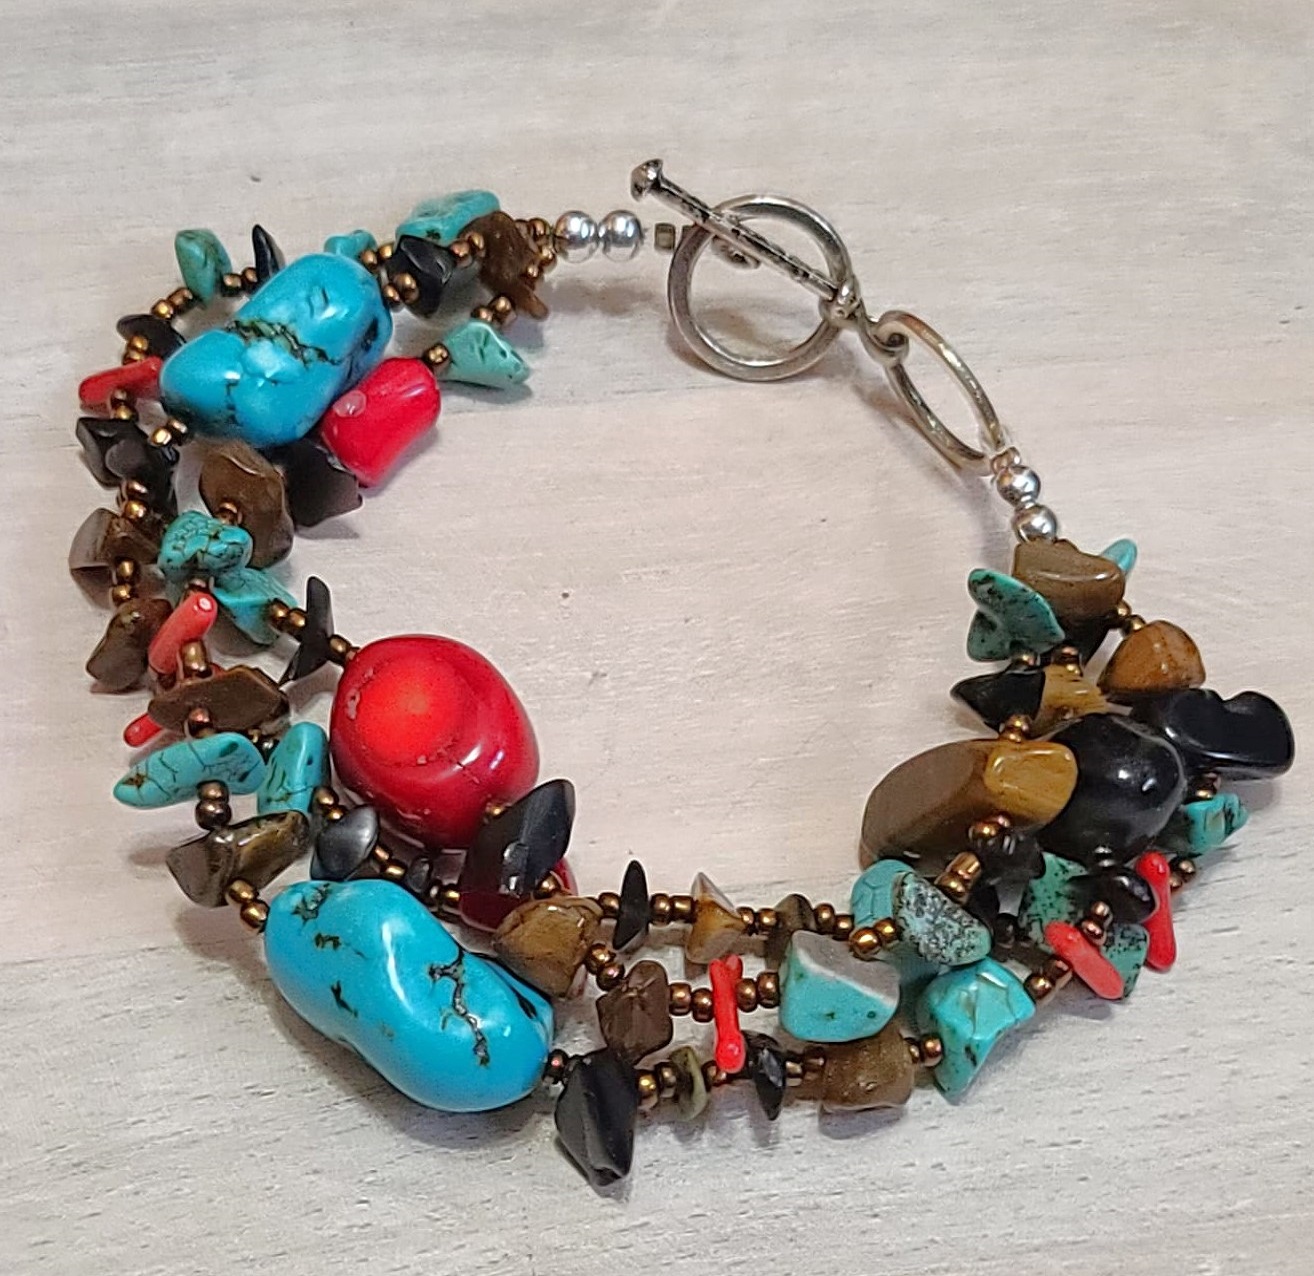 Gemstone nugget bracelet with 3 rows, dyed coral, turquoise, howlite, tiger eye